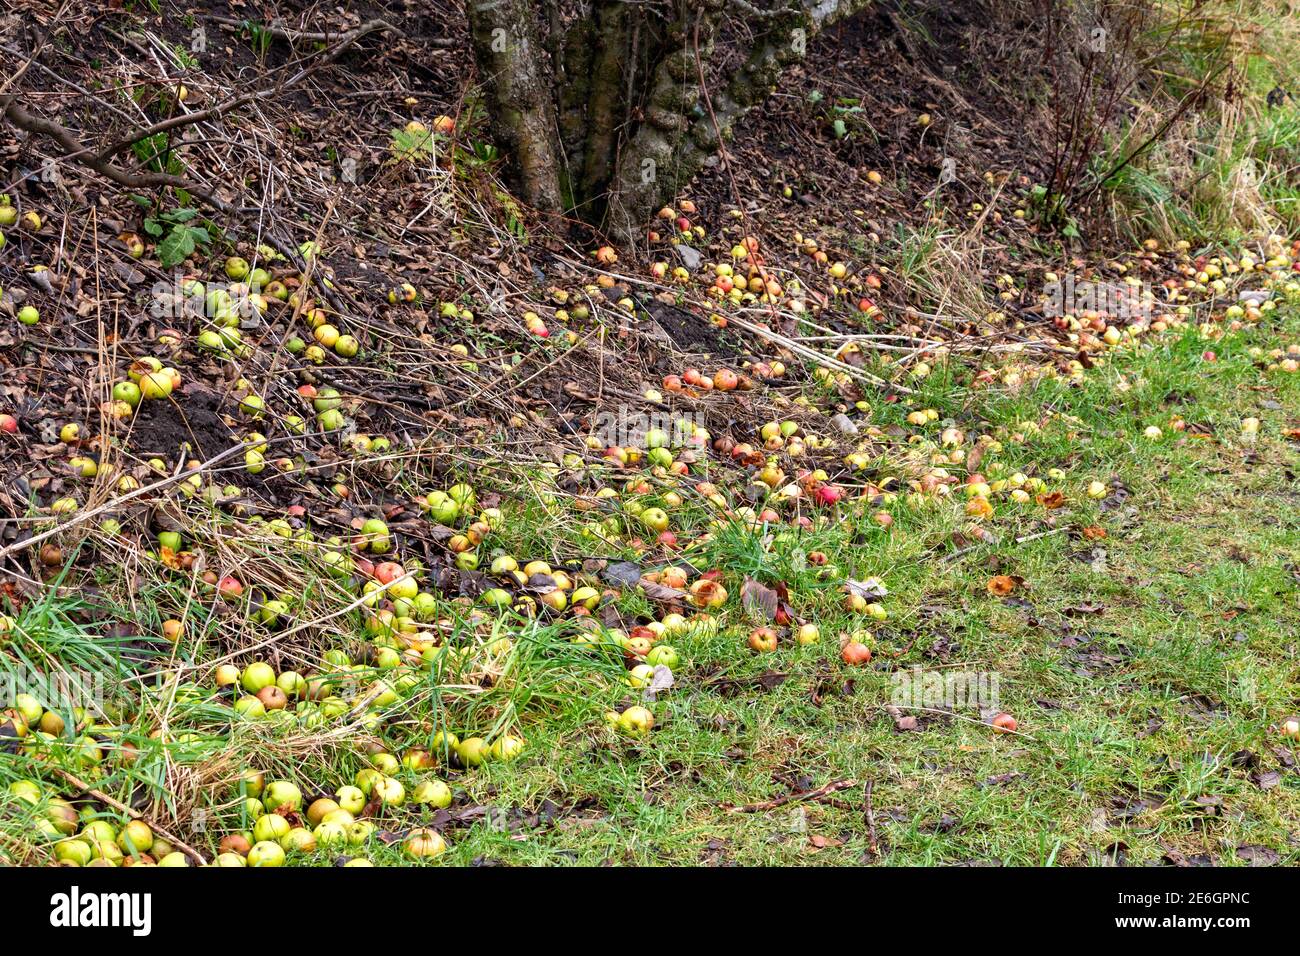 ORCHARD VARIETY OF THE CRAB APPLE Malus sylvestris PROLIFIC FRUIT LYING ON THE GROUND IN WINTER MONTHS Stock Photo